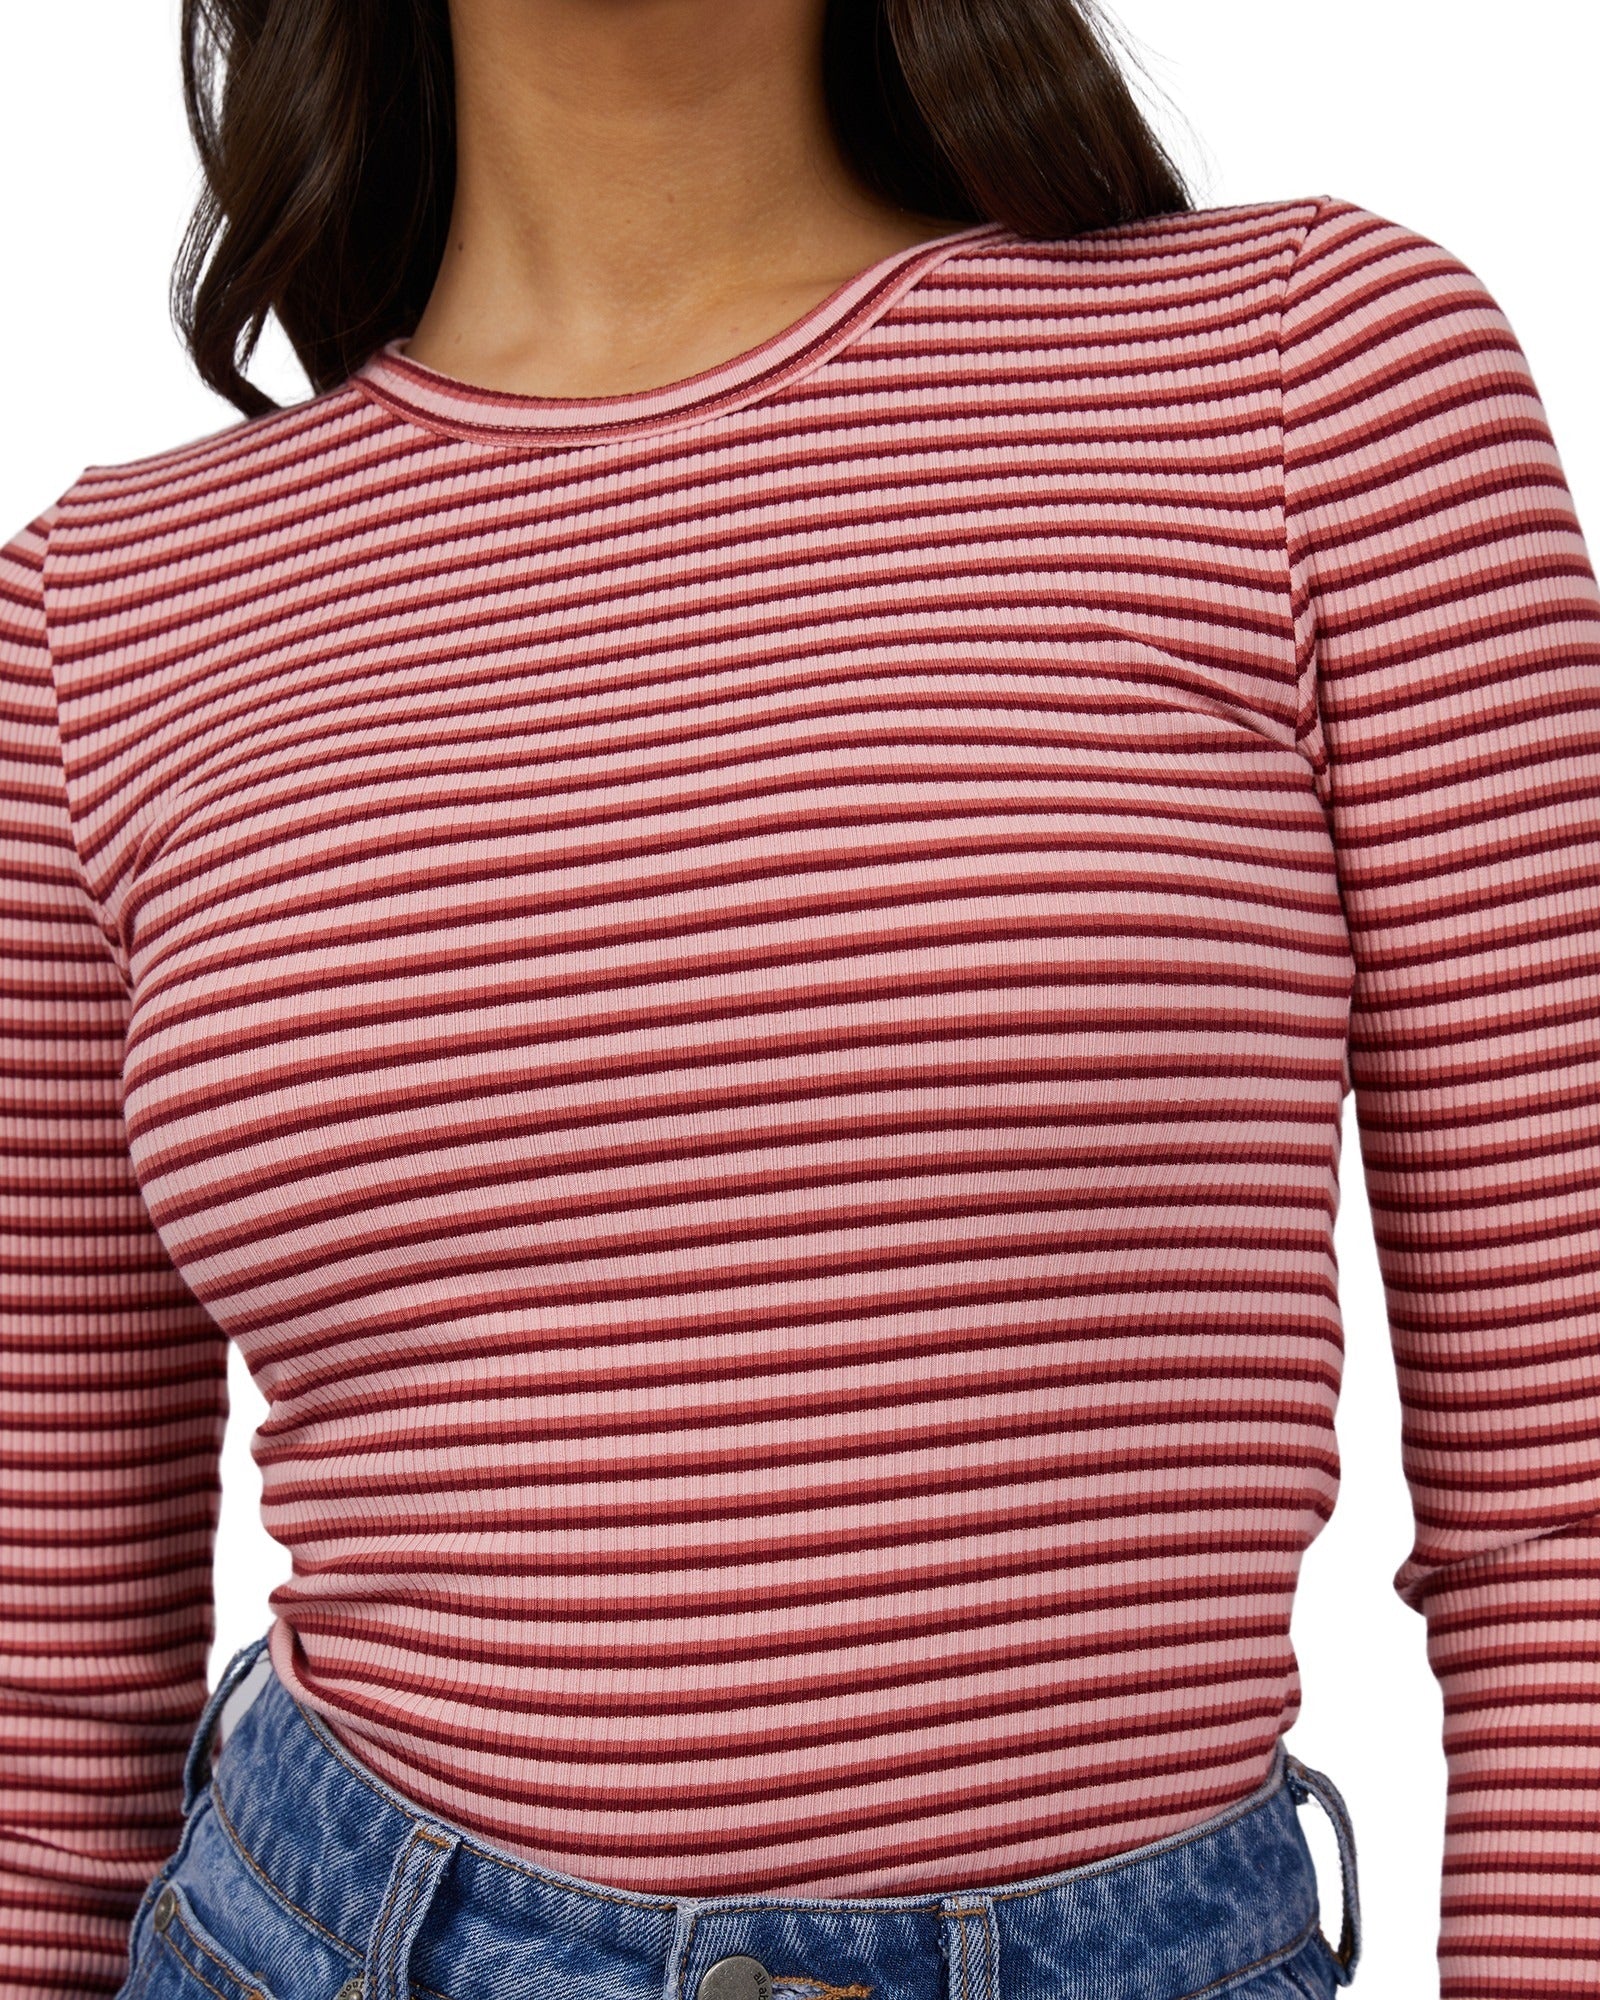 All About Eve - Eve Rib Stripe Long Sleeve - Pink